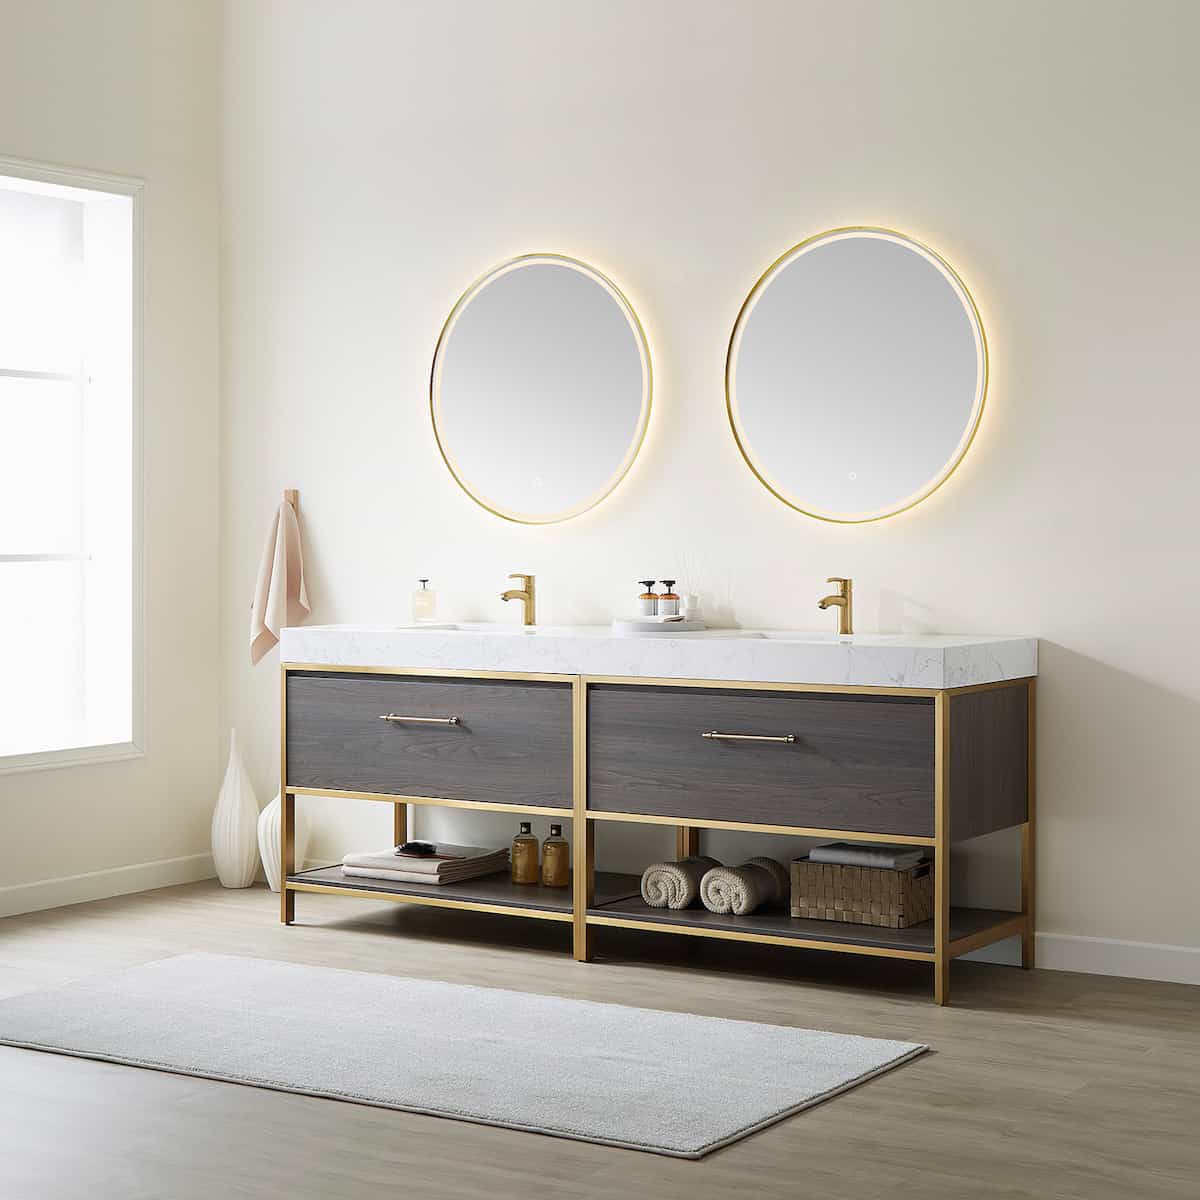 Vinnova Palma 84 Inch Freestanding Double Sink Bath Vanity in Suleiman Oak with White Composite Grain Stone With Mirrors Side 701284G-SO-GW